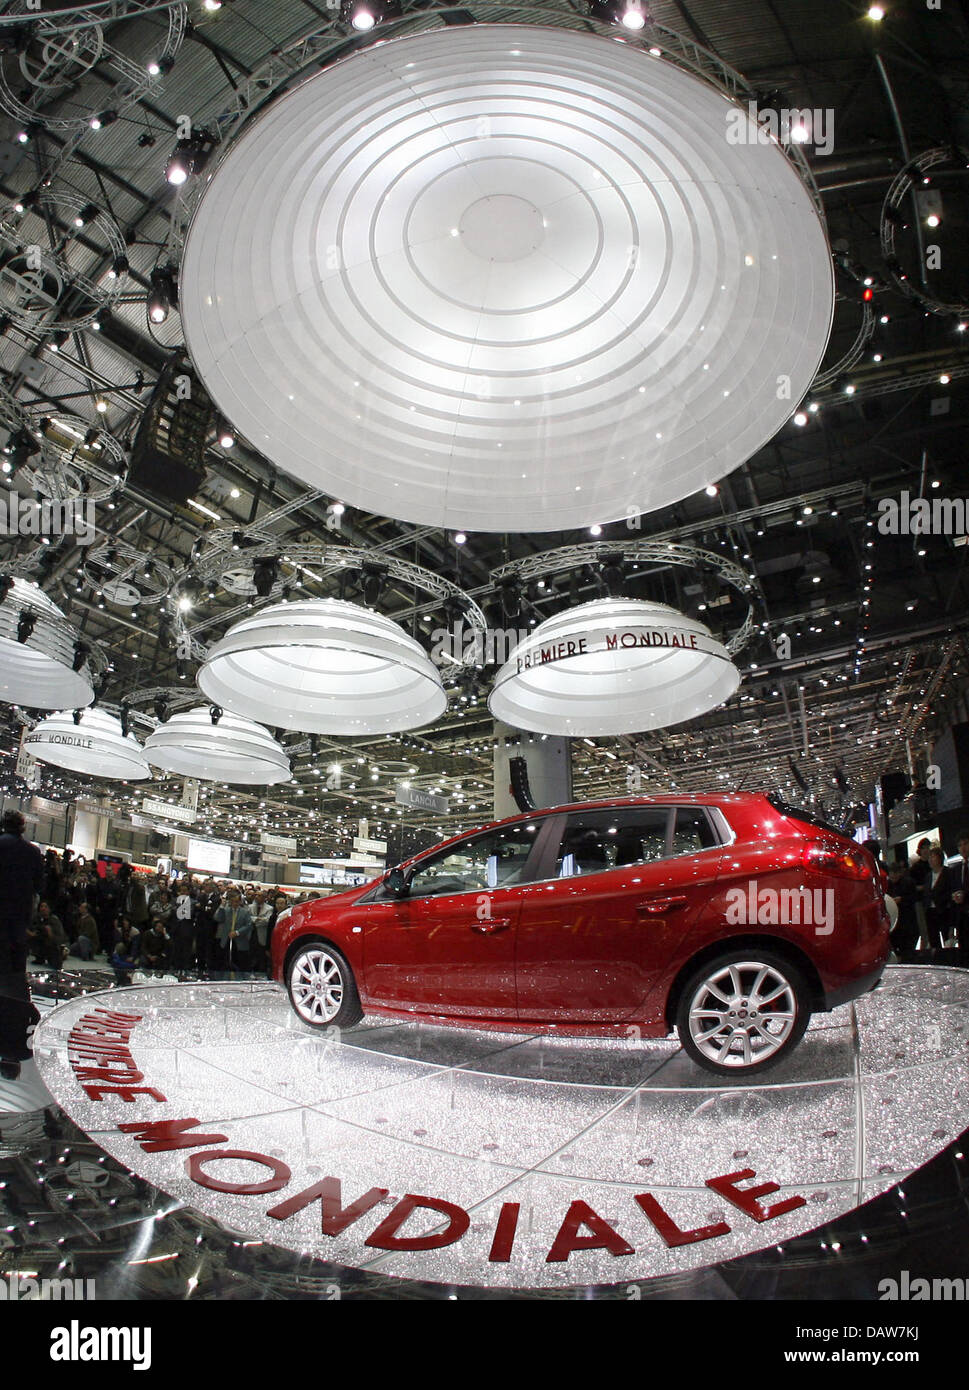 The new Fiat Bravo is presented at the Geneva Motor Show in Geneva, Switzerland, Tuesday, 06 March 2007. The trade show running from 8 to 18 March presents the latest developments of the automobile industry. Photo: Uli Deck Stock Photo